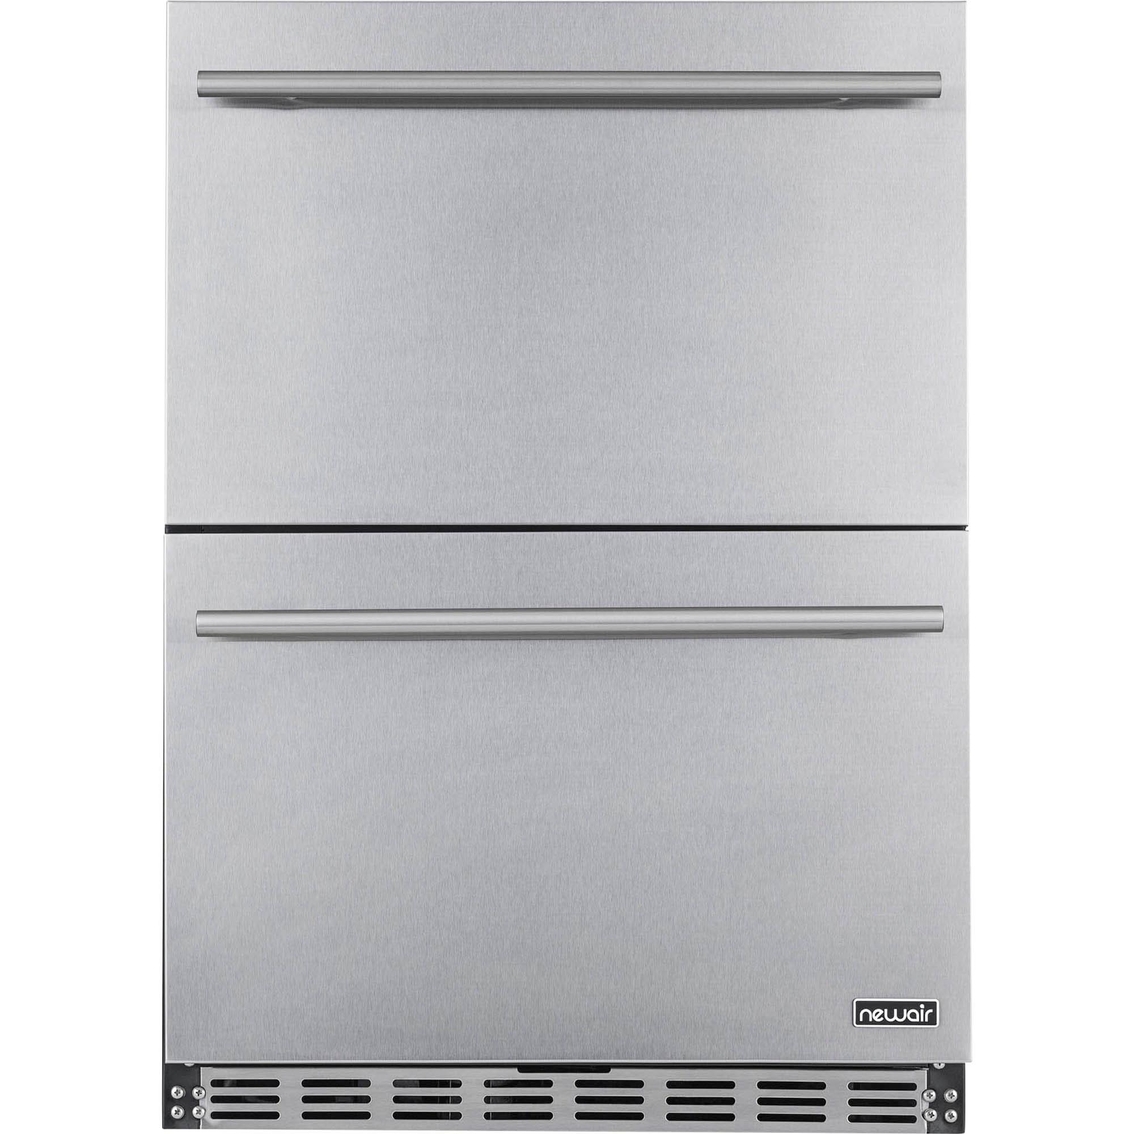 NewAir 24 in. Built In Dual Zone 20 Bottle and 70 Can Wine and Beverage Fridge - Image 2 of 10